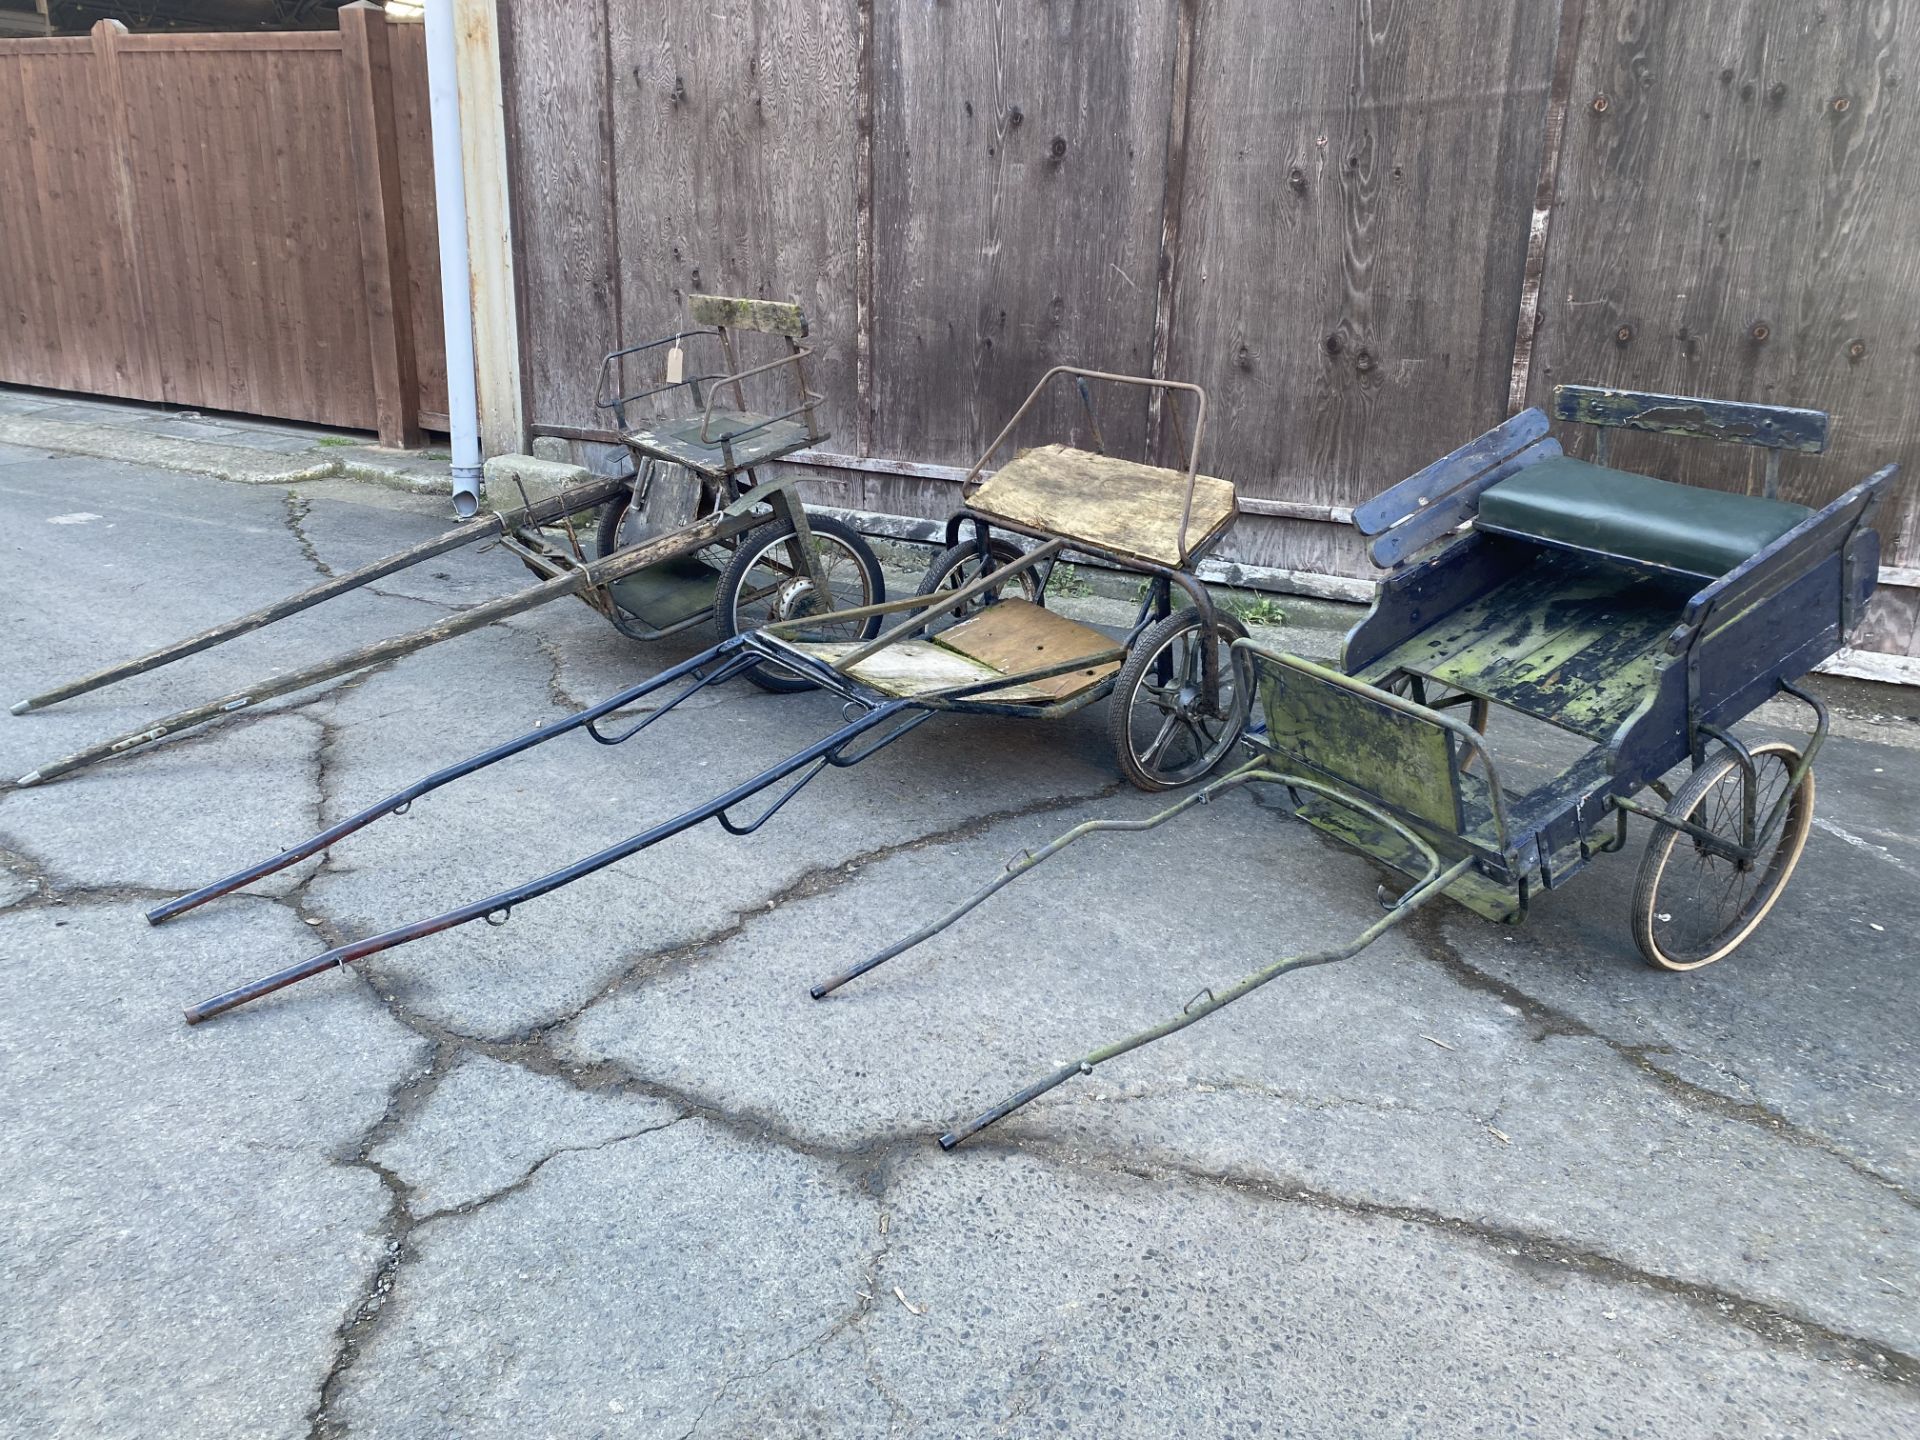 FOUR EXERCISE CARTS comprising three 2 wheel carts with metal frames and wire wheels; together